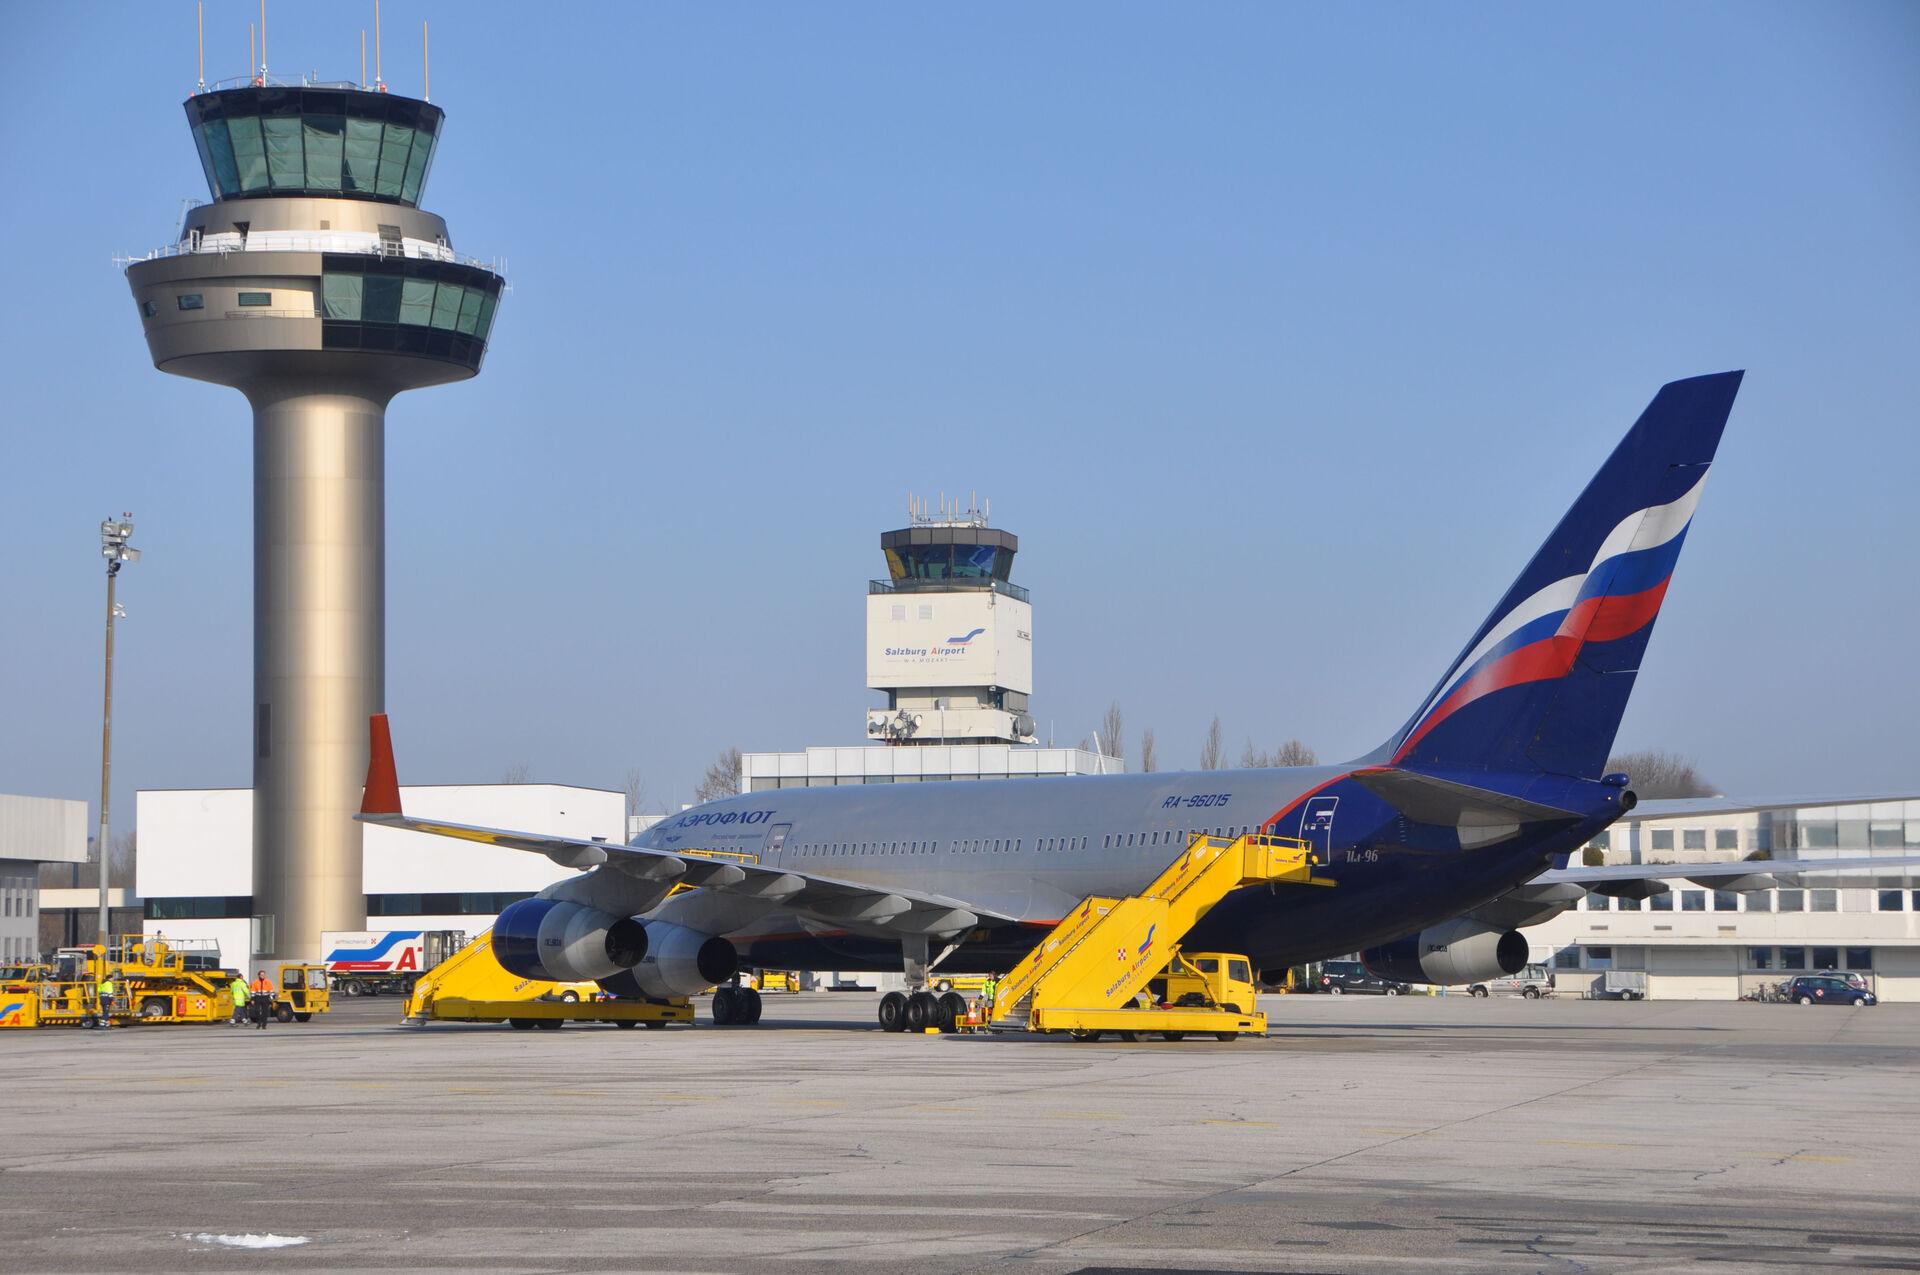 Tower Spotting: Can You Identify These Airport ATC Towers? | Aviation ...